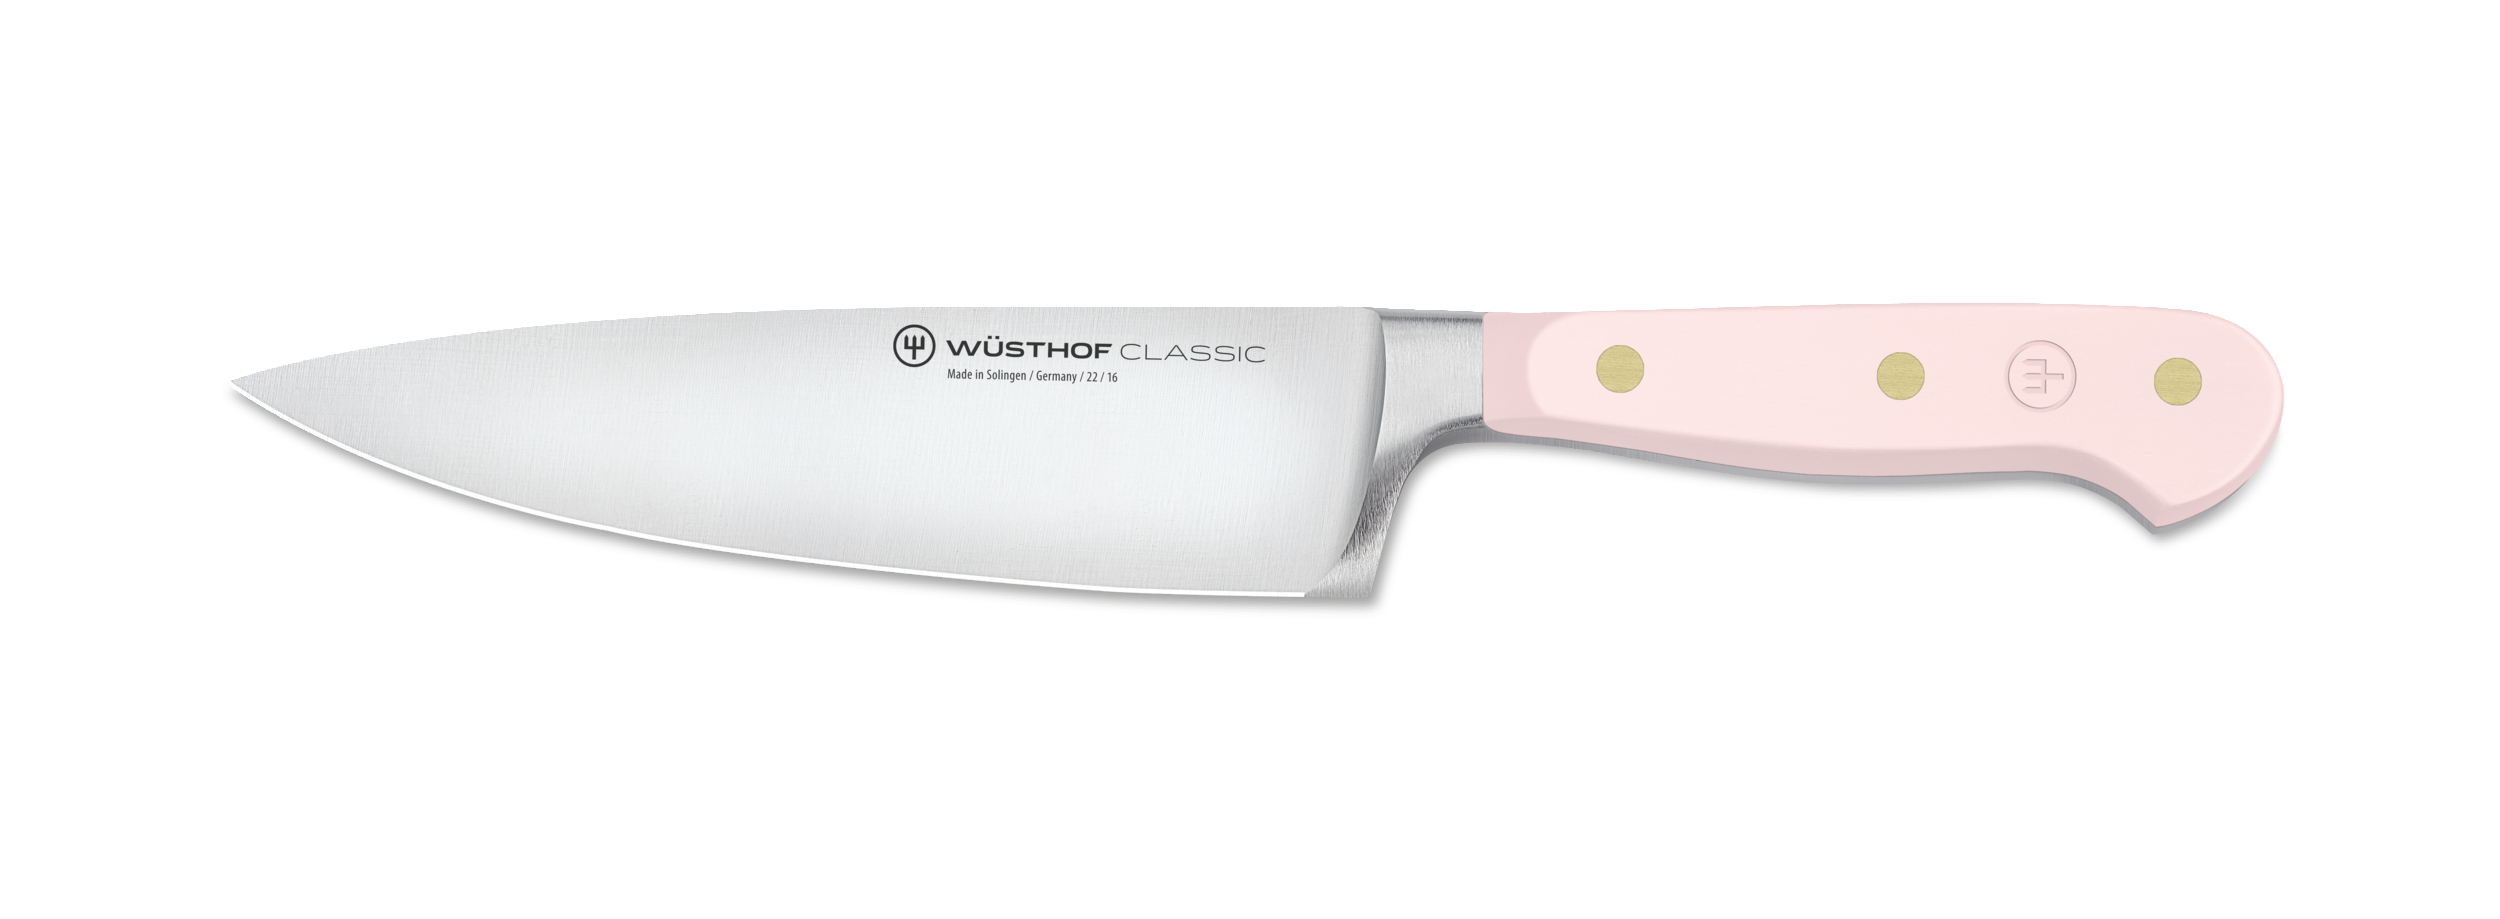 Wusthof Performer Chef's Knife - 8 – Cutlery and More